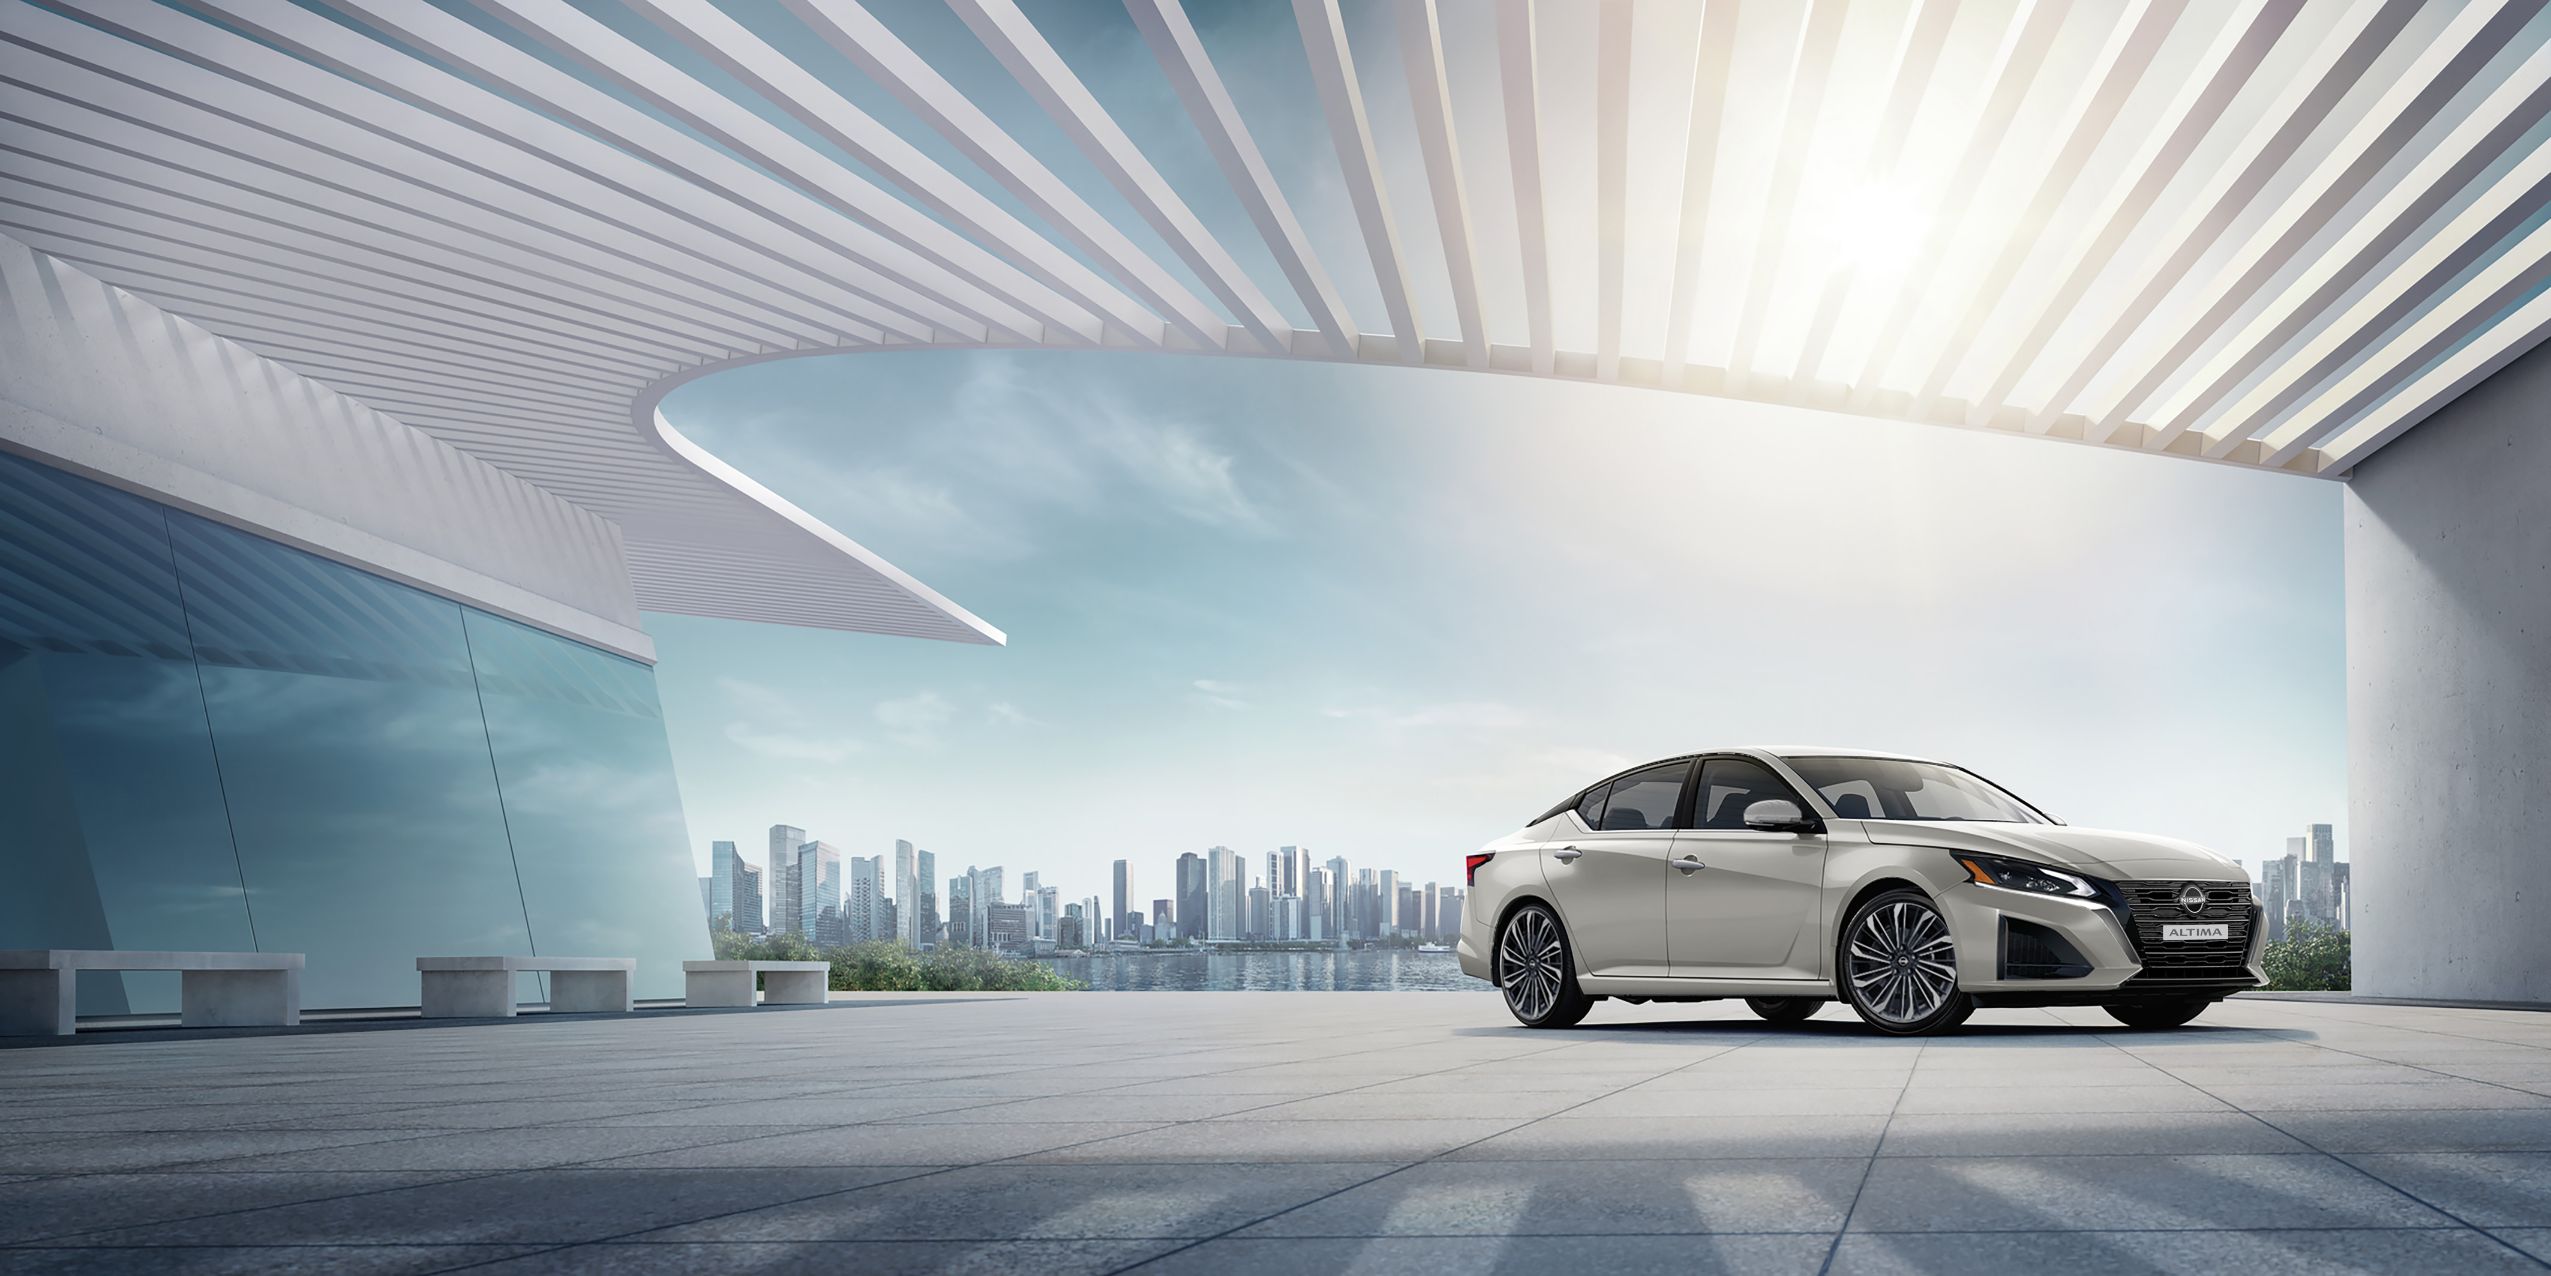 2023 Nissan Altima now available at Al Masaood Automobiles with a modern design and technology upgrades to deliver an intuitive driving experience